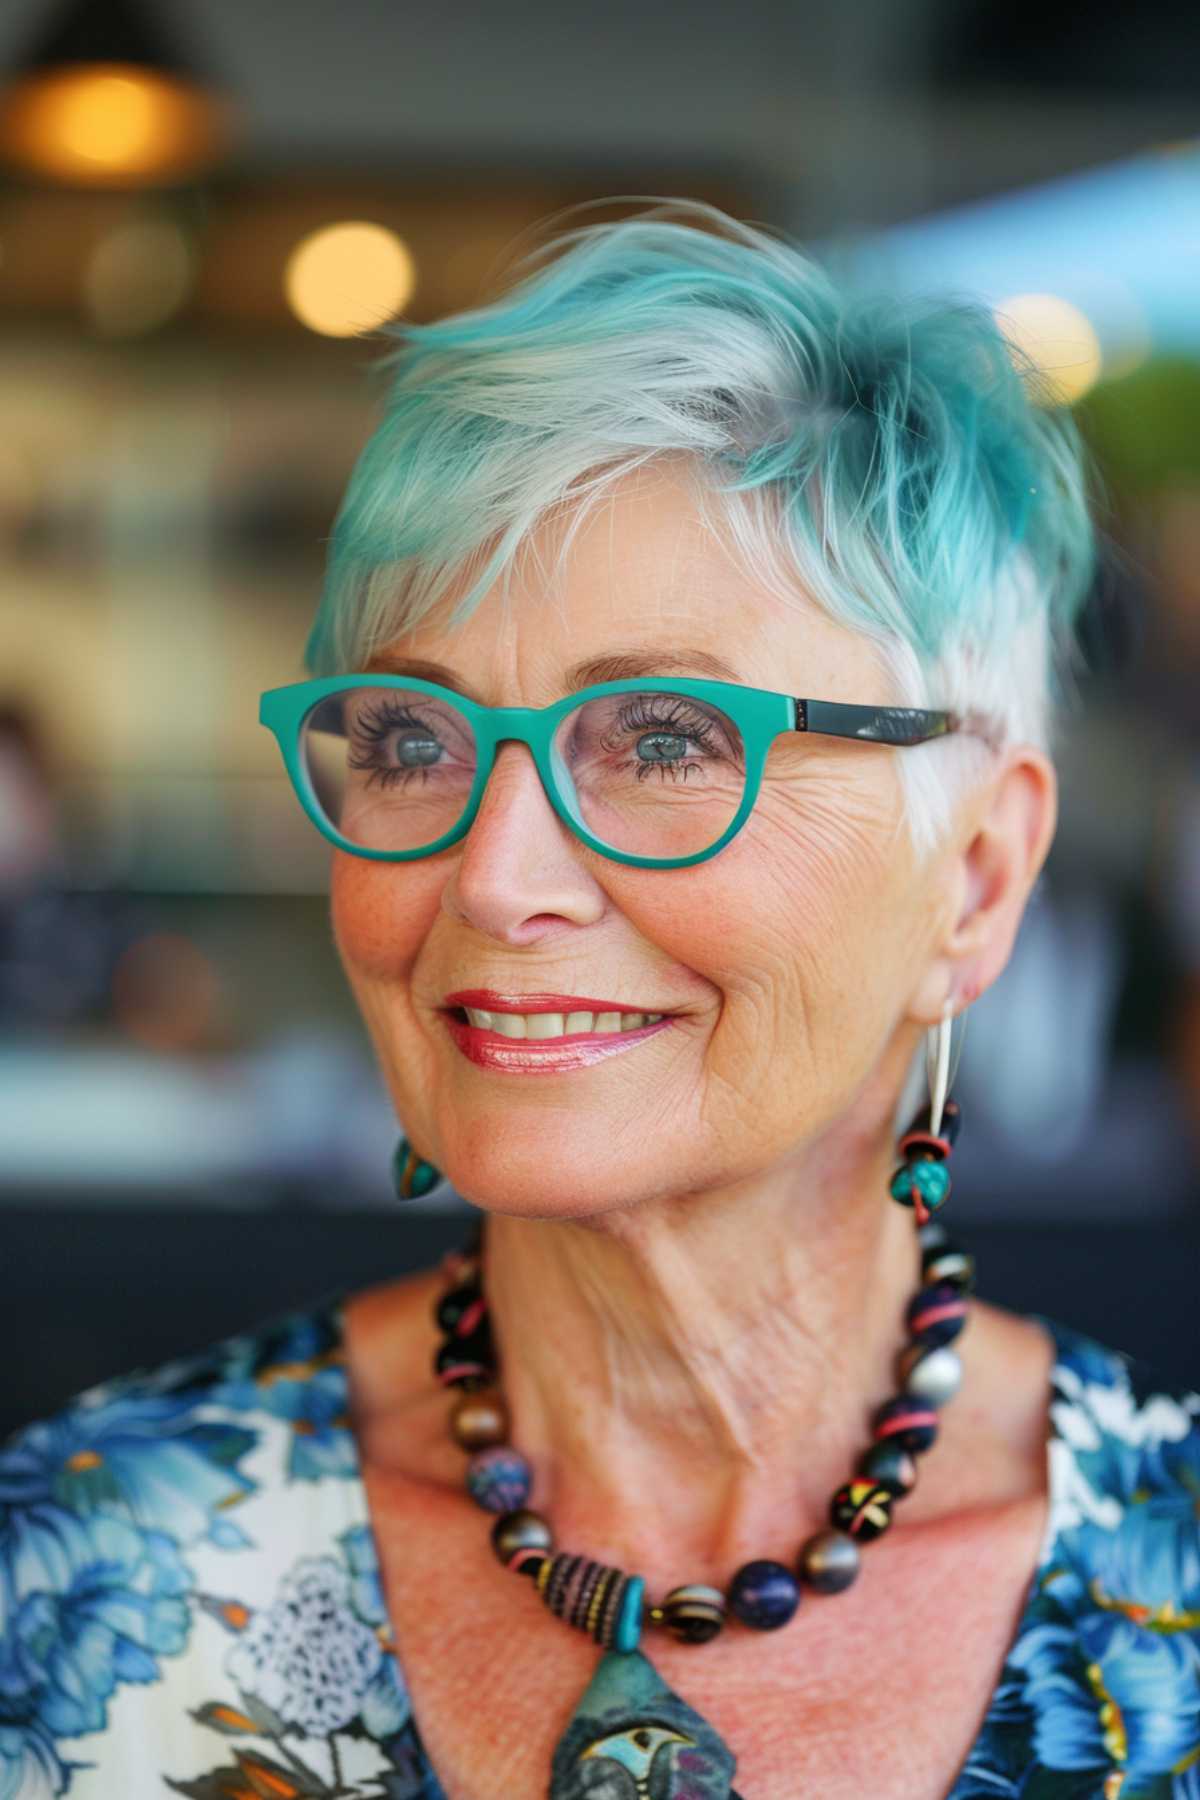 Bold pixie cut with turquoise highlights and glasses for a fun, youthful look.